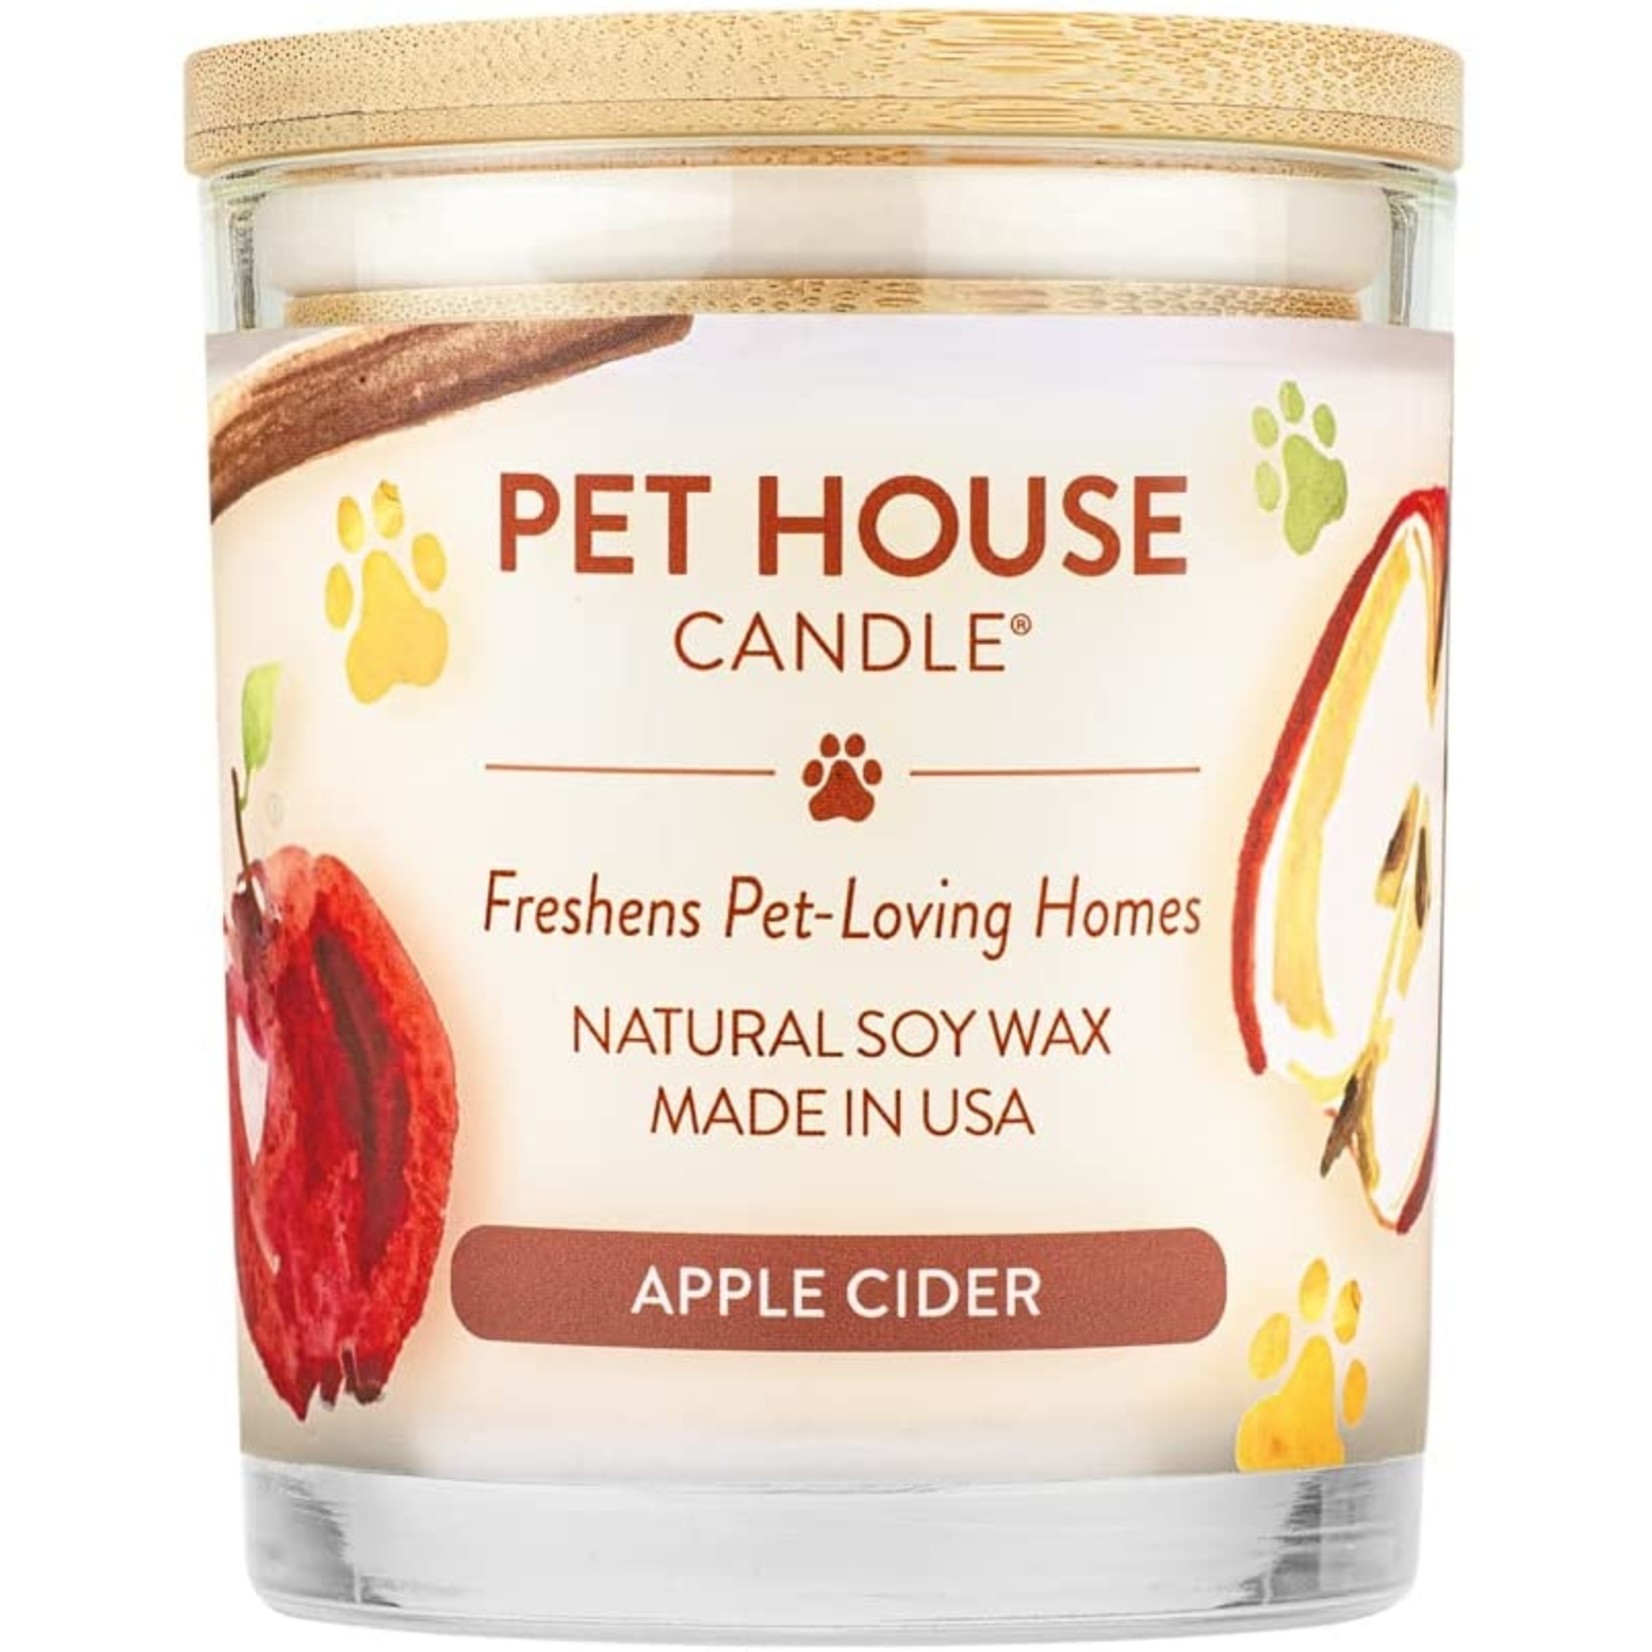 Pet House PET HOUSE APPLE CIDER 60 HOUR CANDLE